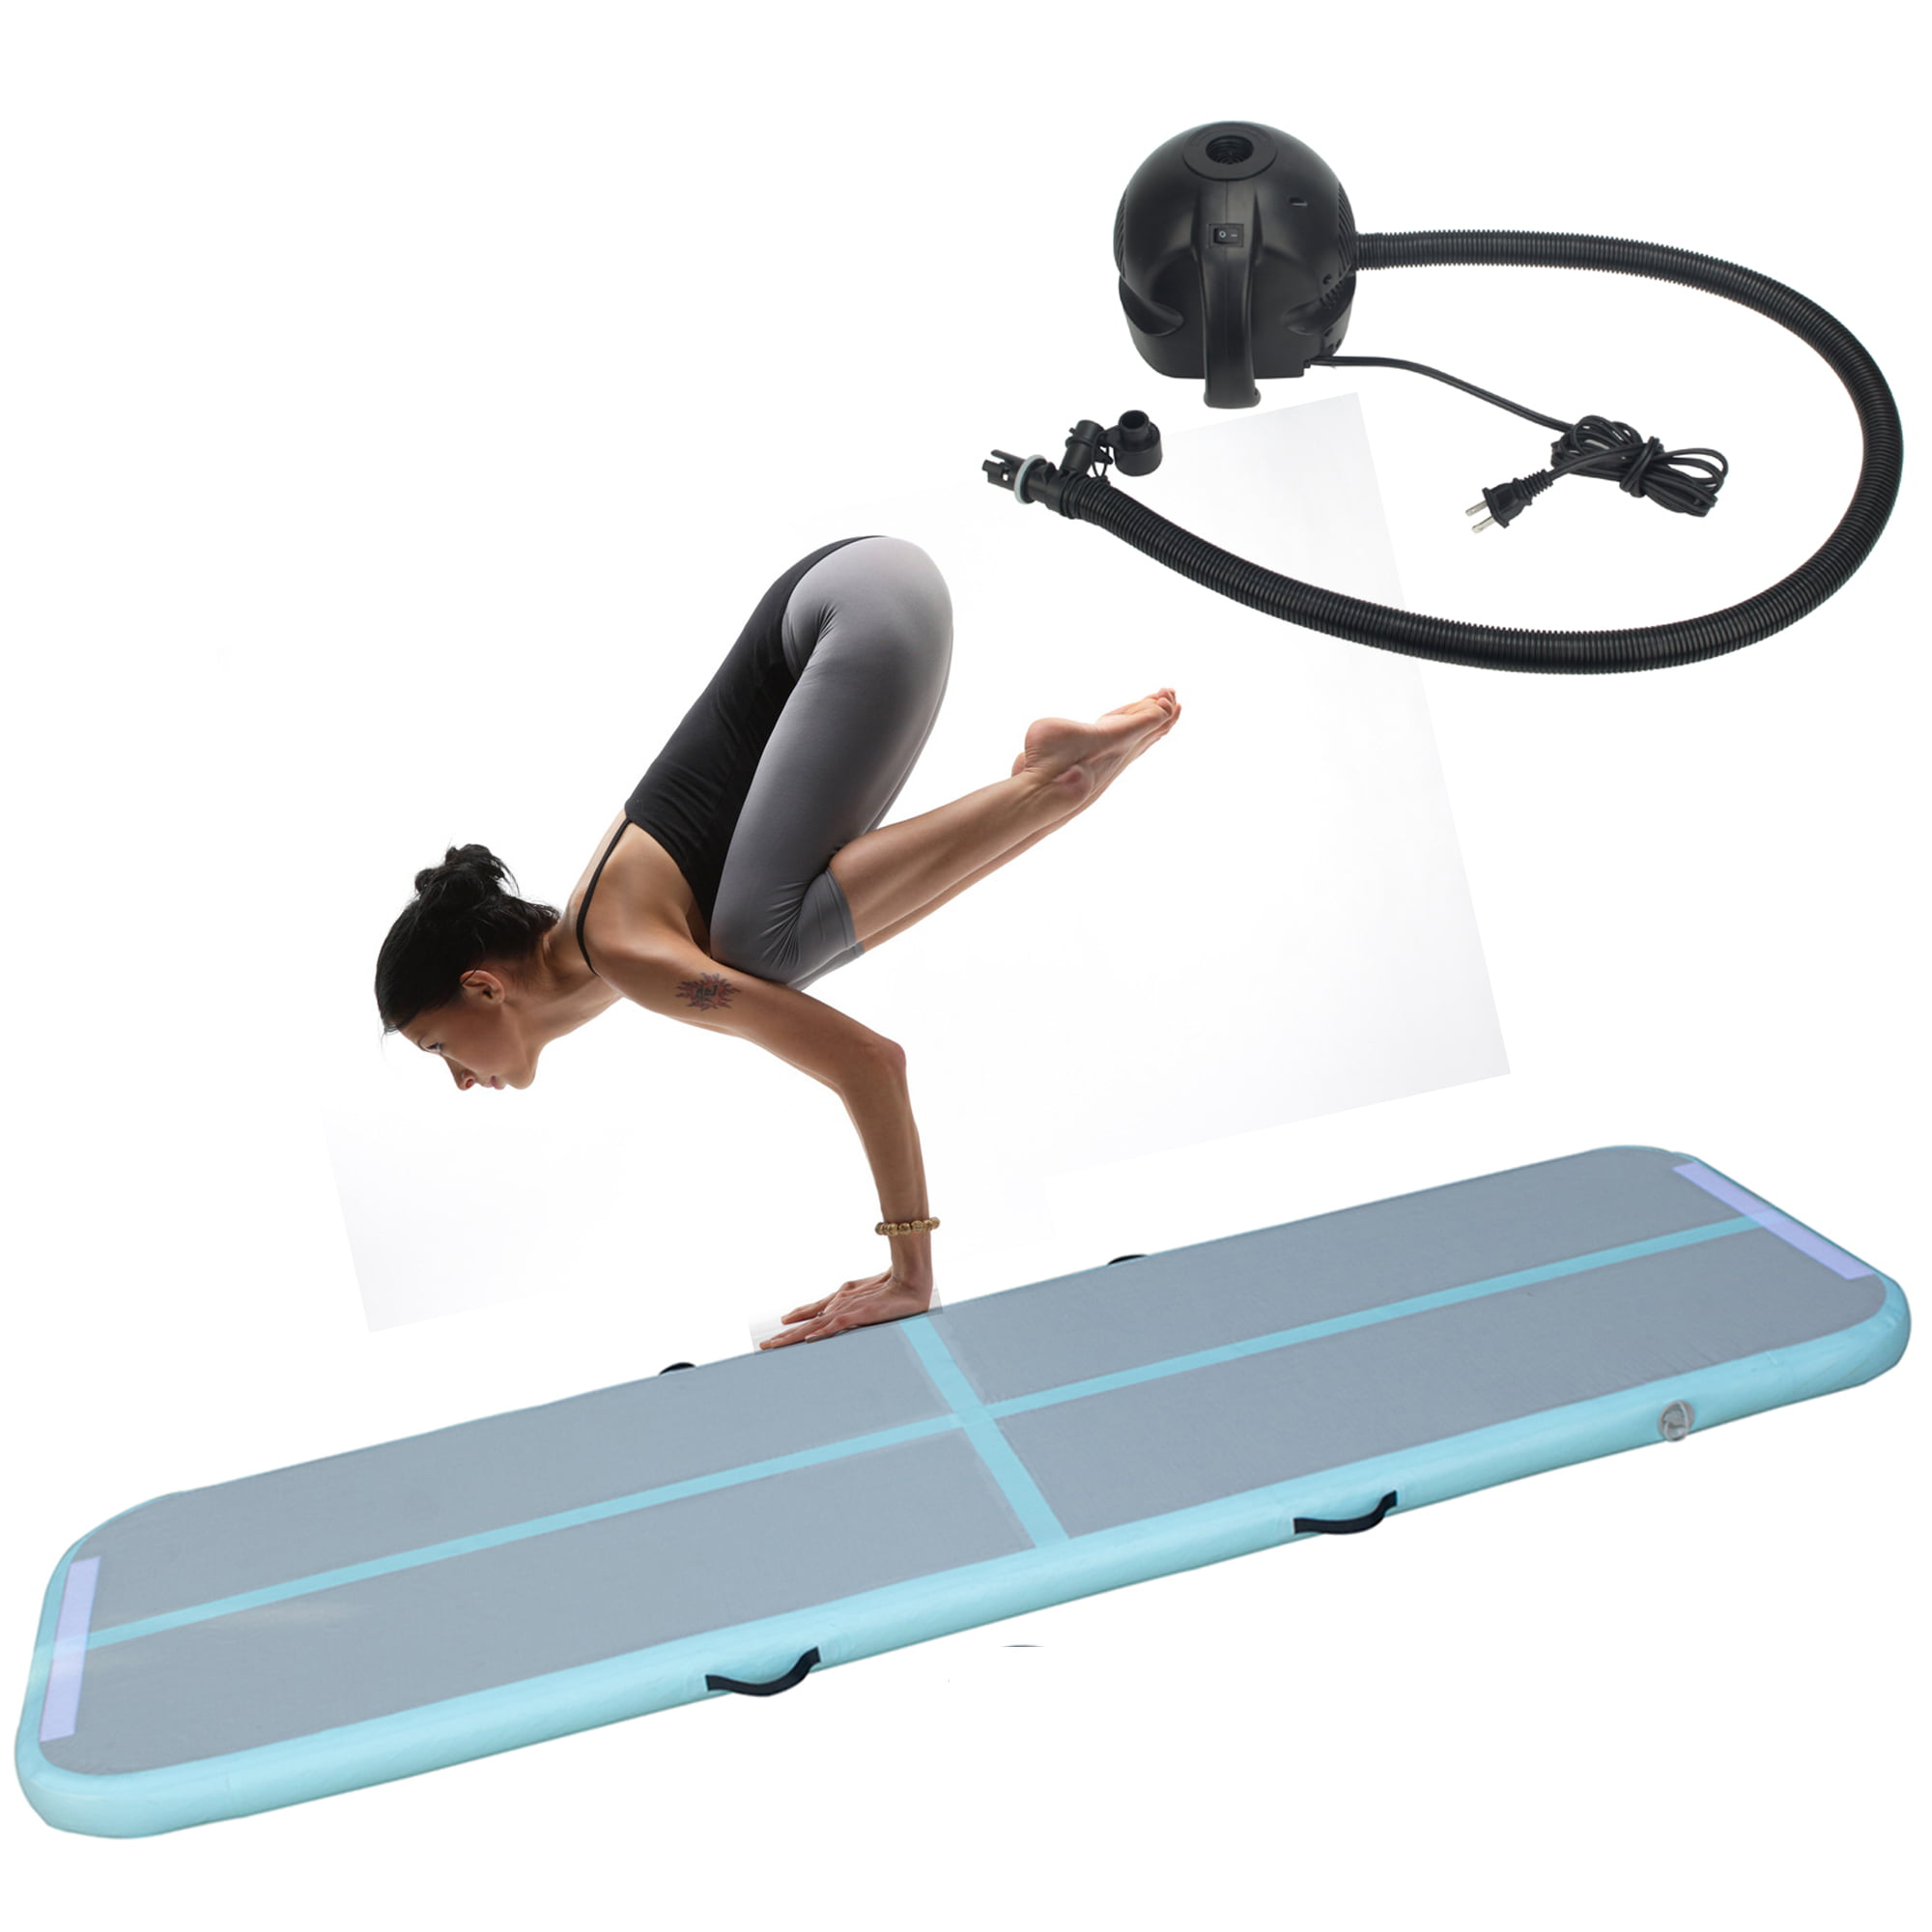 Cotogo Air Track Tumbling Mat Gymnastics Inflatable Airtracks Gym Mats with Electric Air Pump Home Indoor Workout Training Cheerleading Use